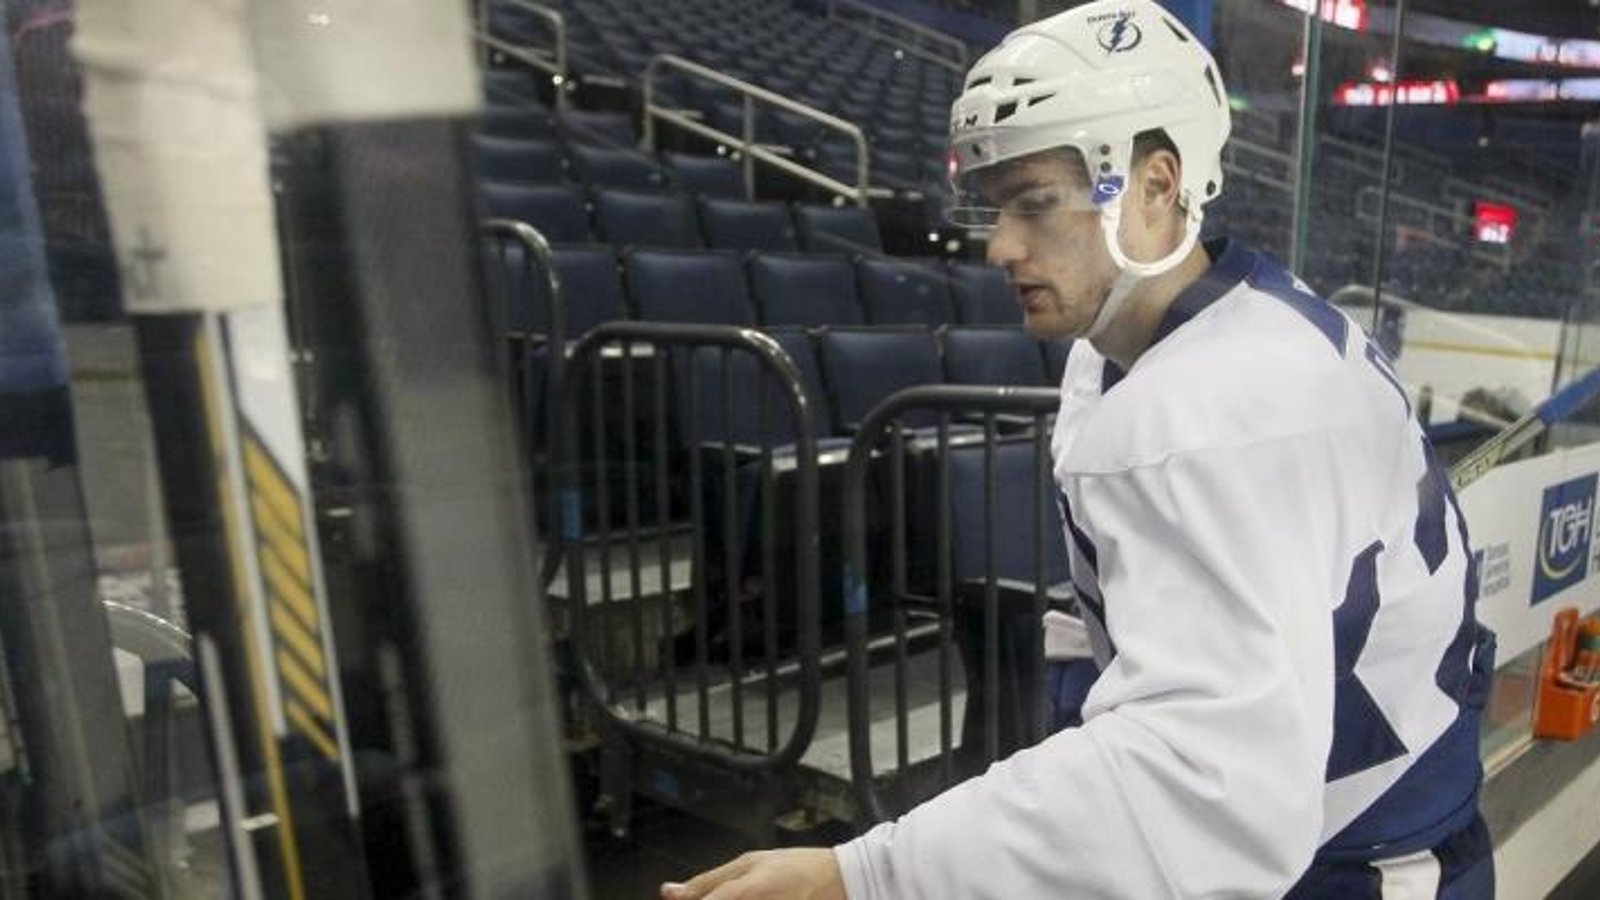 More problems between Jonathan Drouin and Lightning.